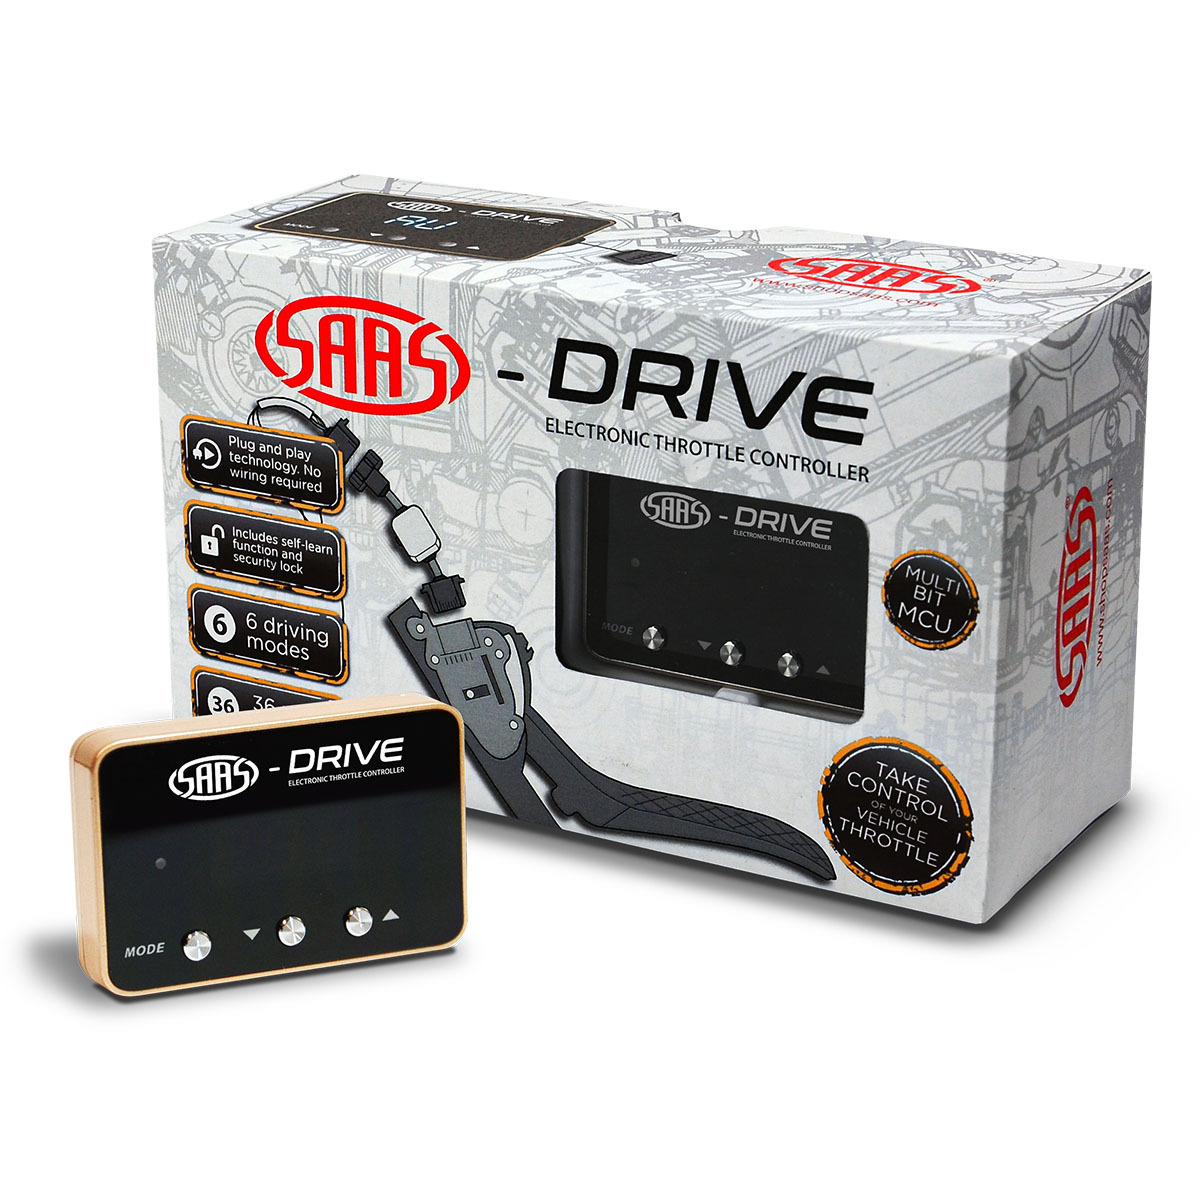 SAAS-Drive Throttle Controller suit Infiniti Nissan and more